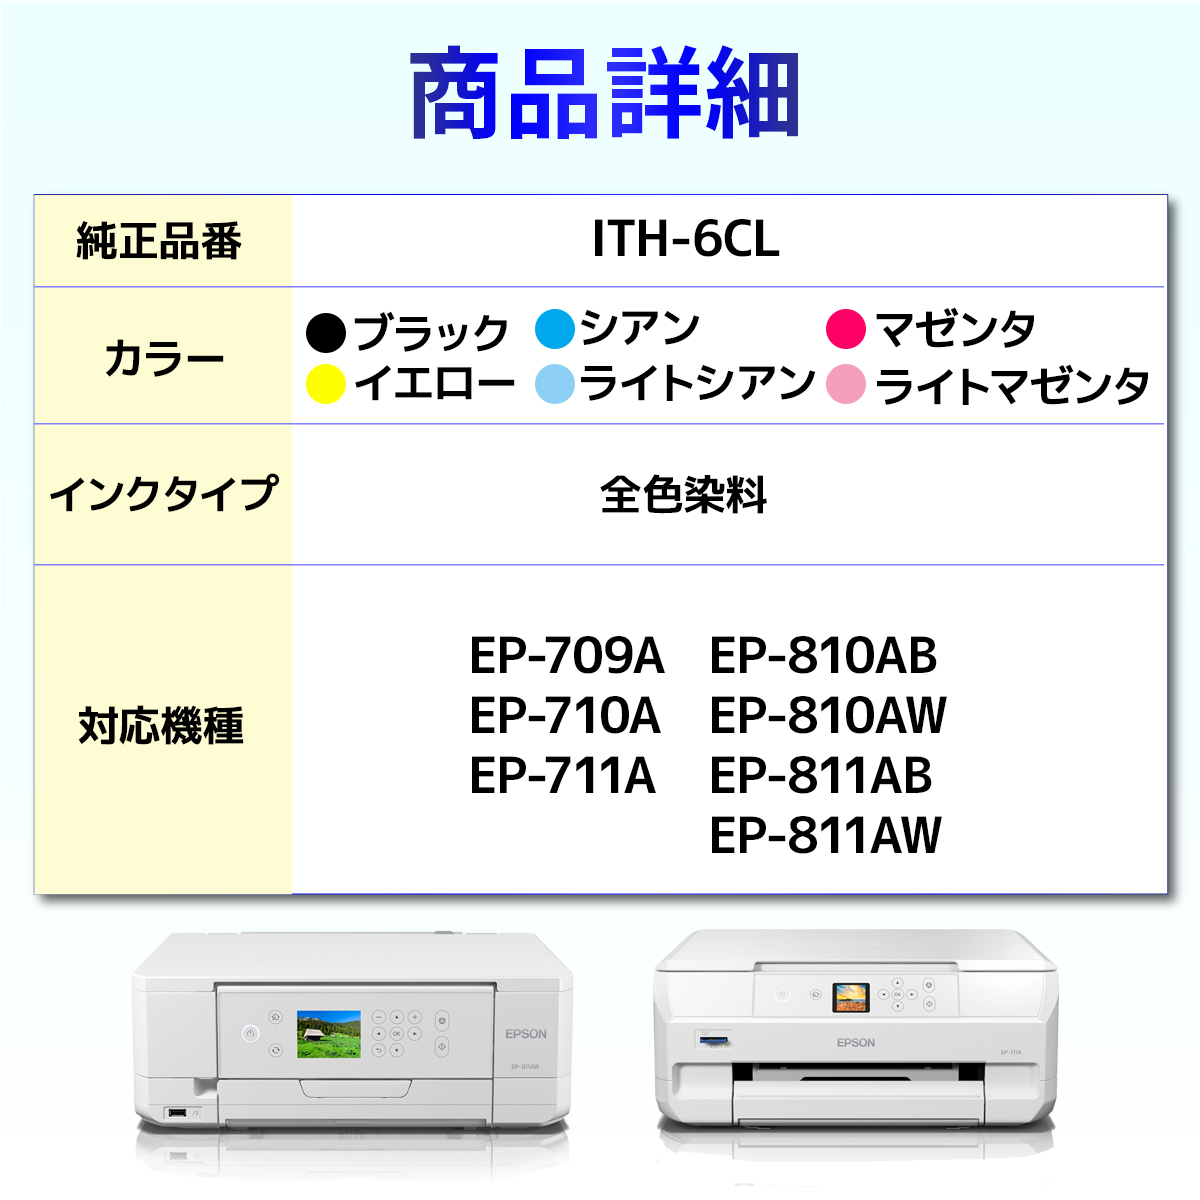 ITH-6CL ITH イチョウ 互換 インク EPSON エプソン ７個 EP-709A EP